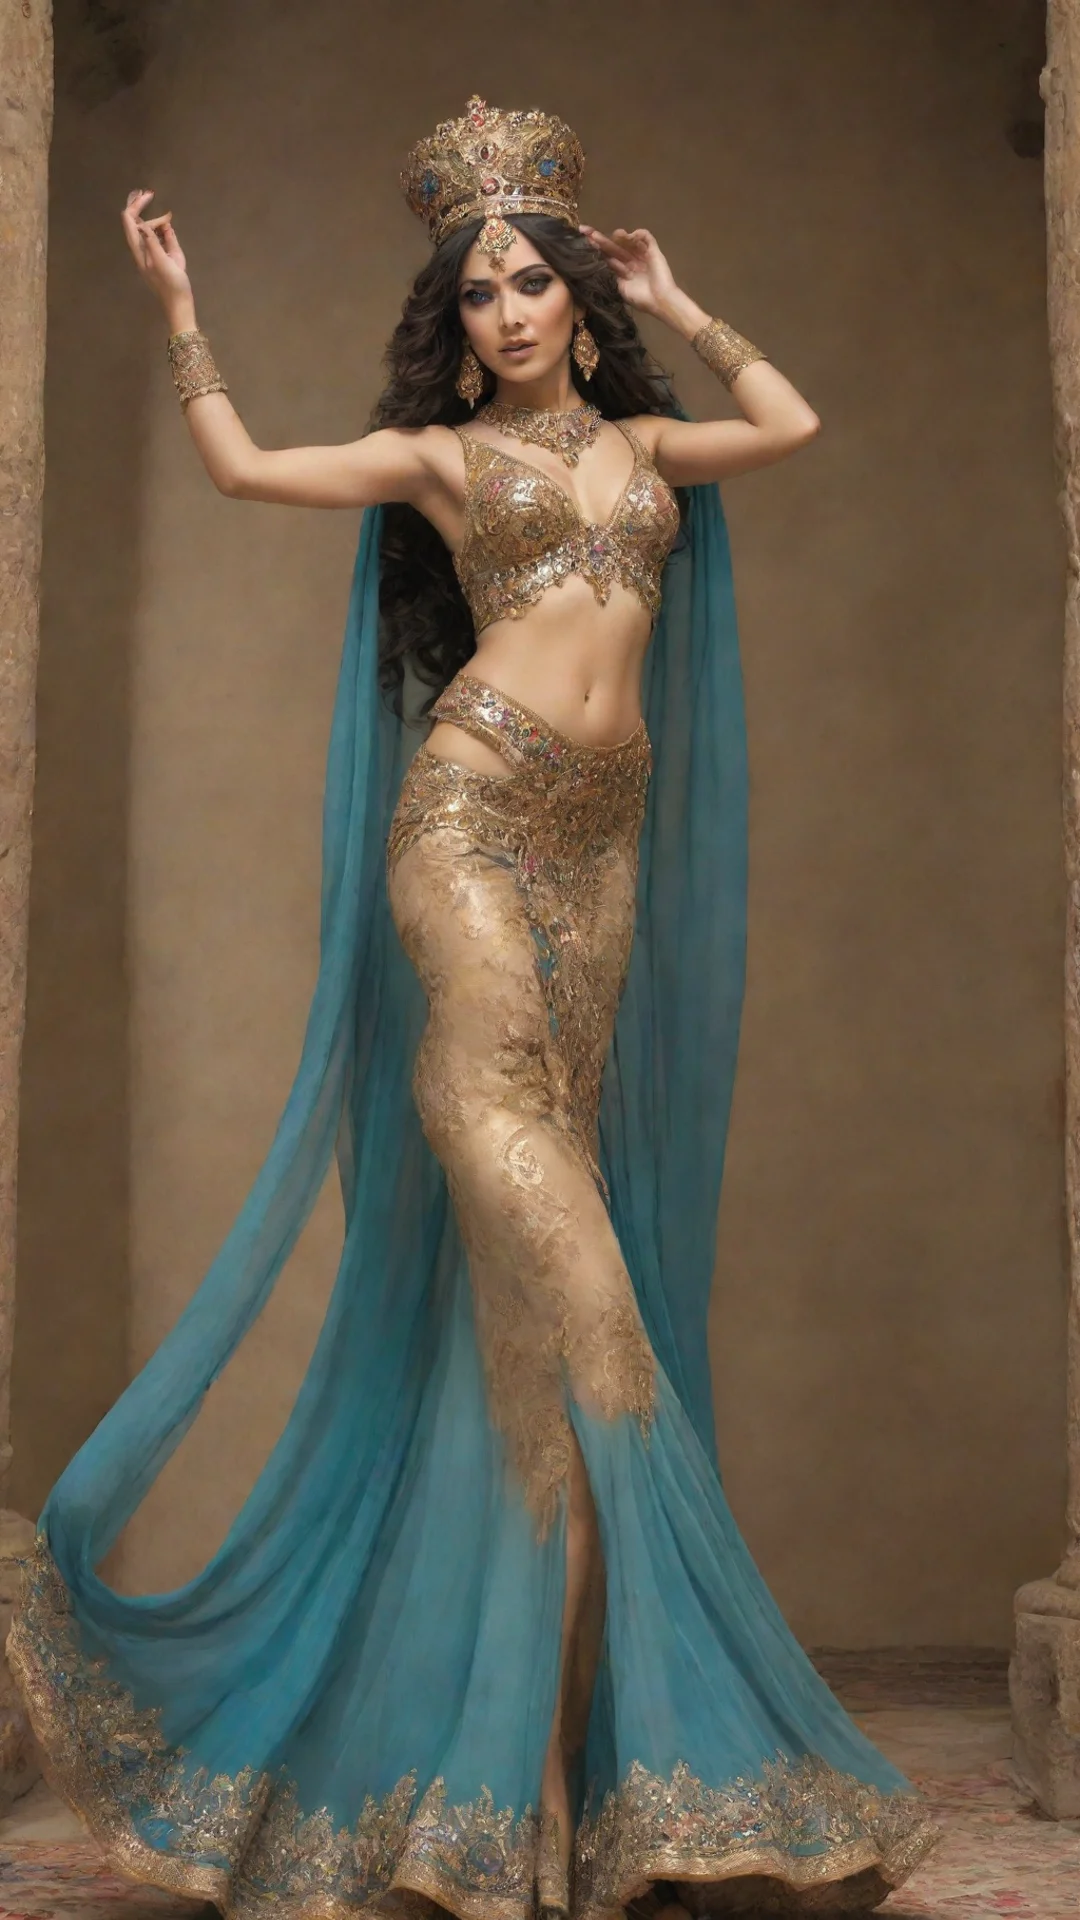 aiartstation art dancing persian queen confident engaging wow 3 tall